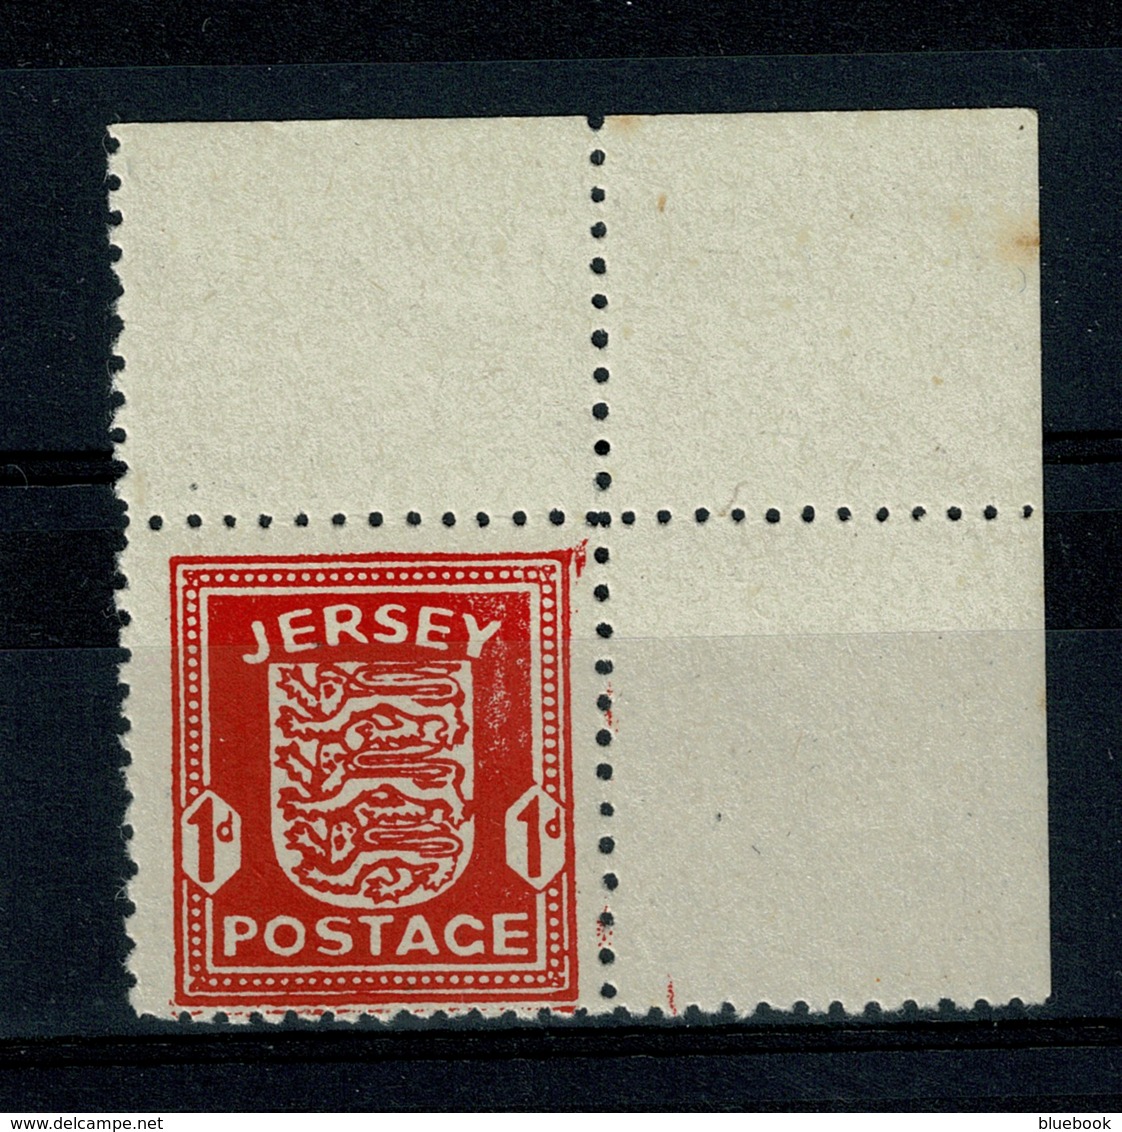 Ref 1354 - WWII Channel Islands - Jersey 1943 SG 2 - 1d MNH Stamp Cat £8 With Printing Flaws - Jersey